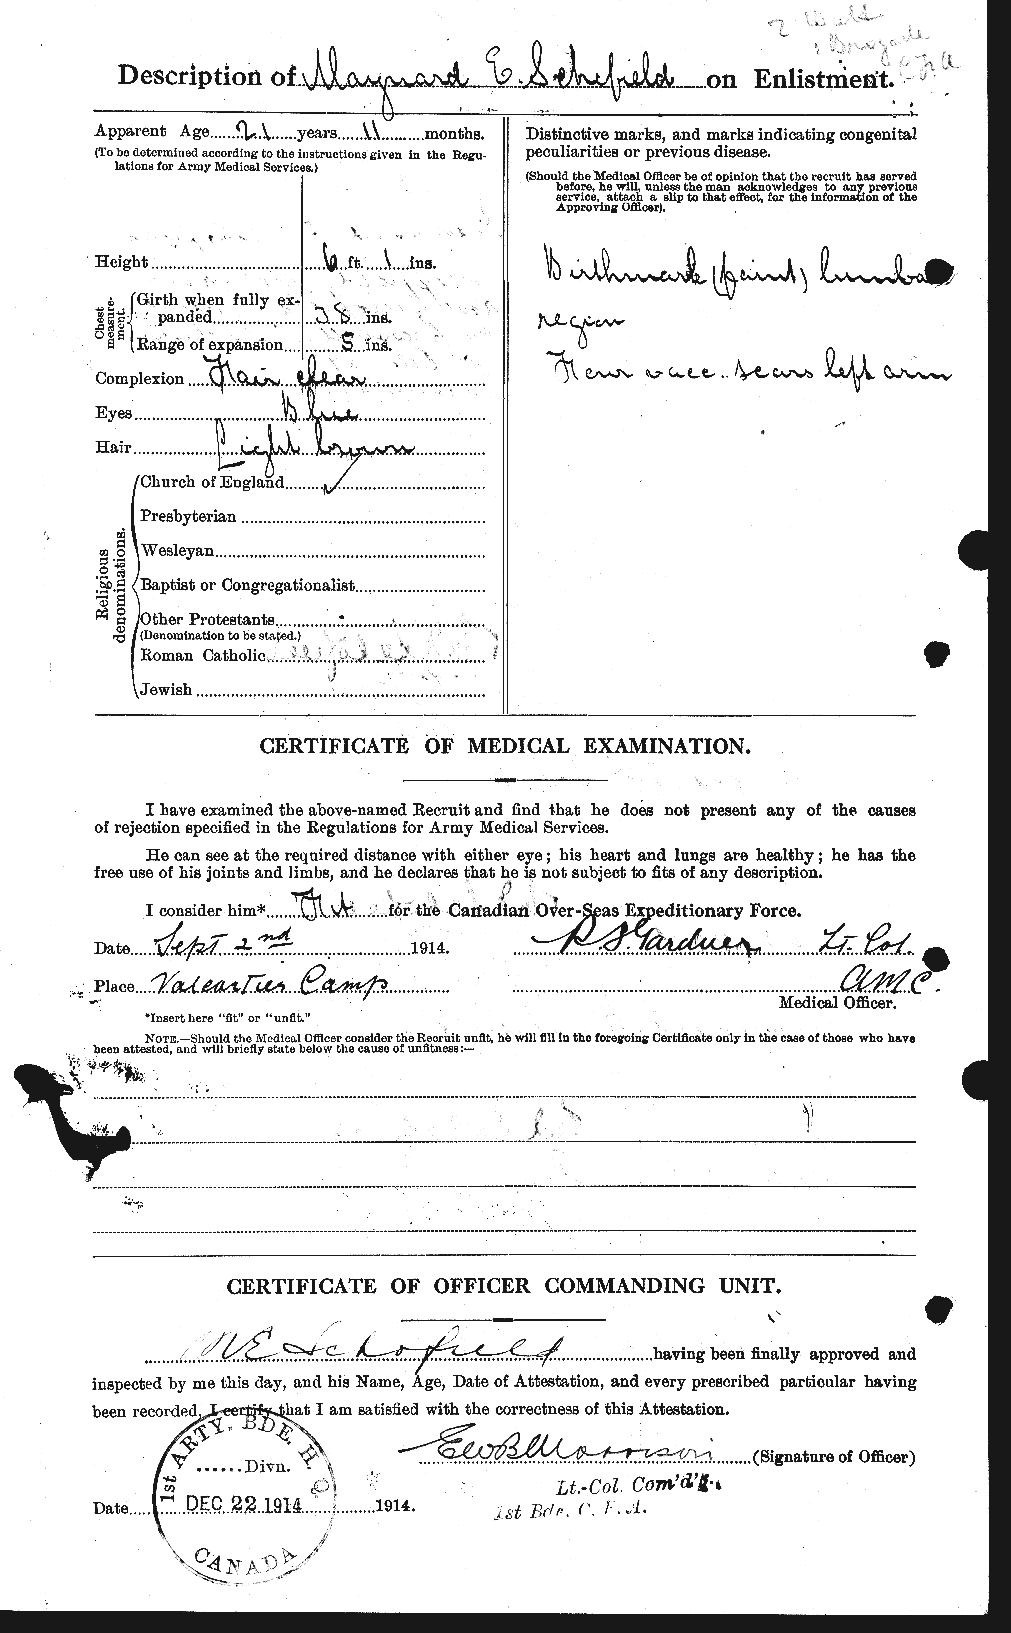 Personnel Records of the First World War - CEF 081065b